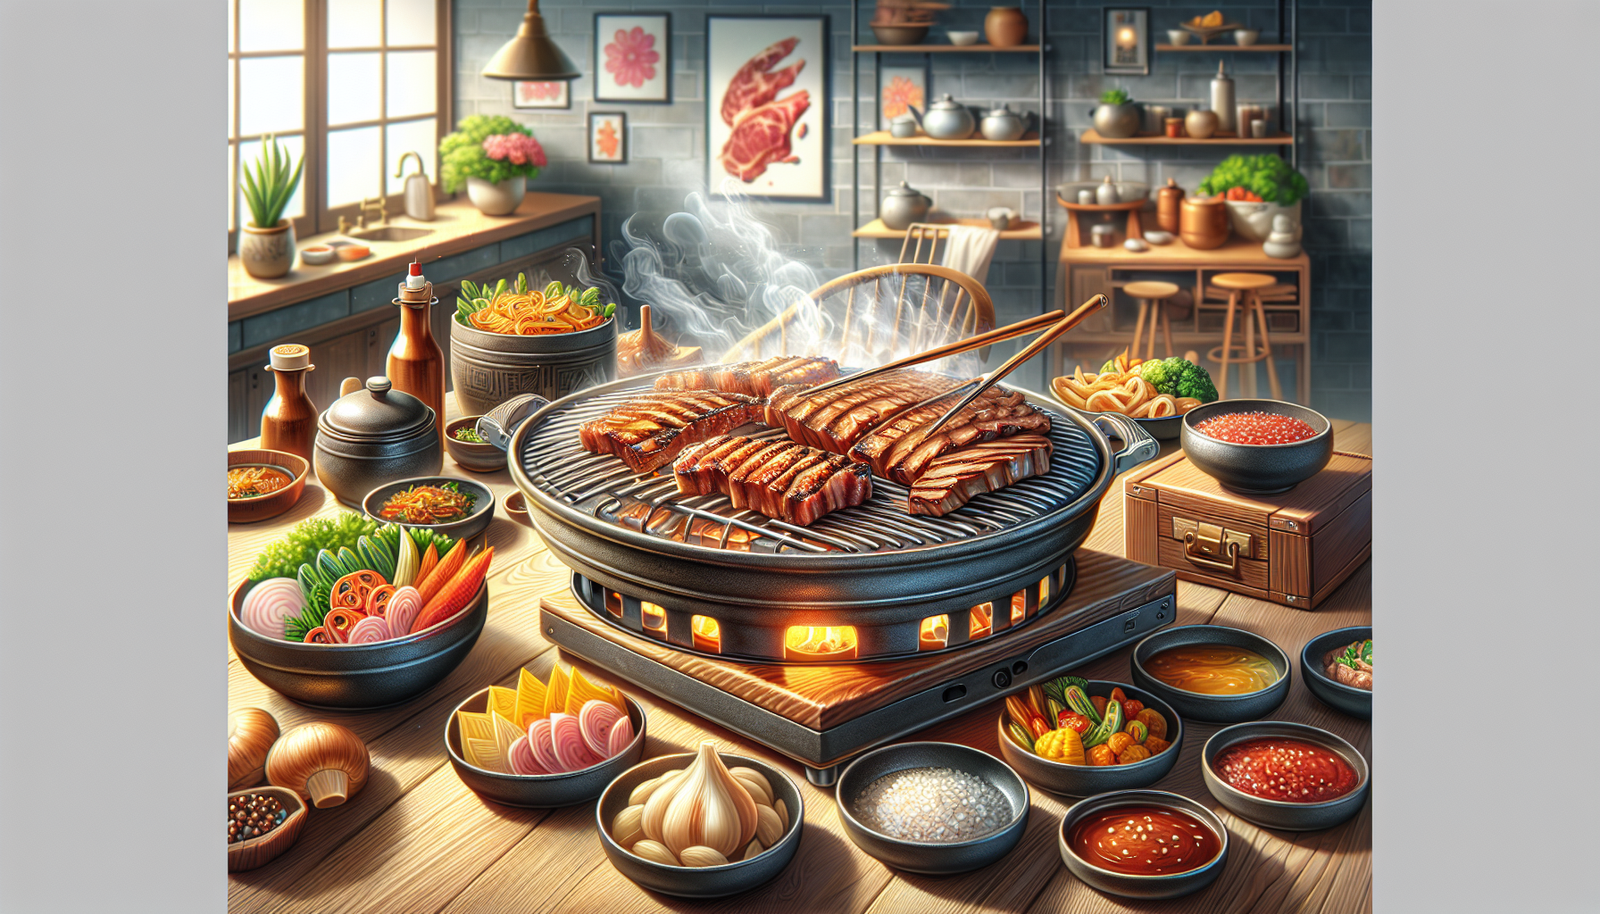 How Do You Properly Prepare And Serve Korean Barbecue At Home?